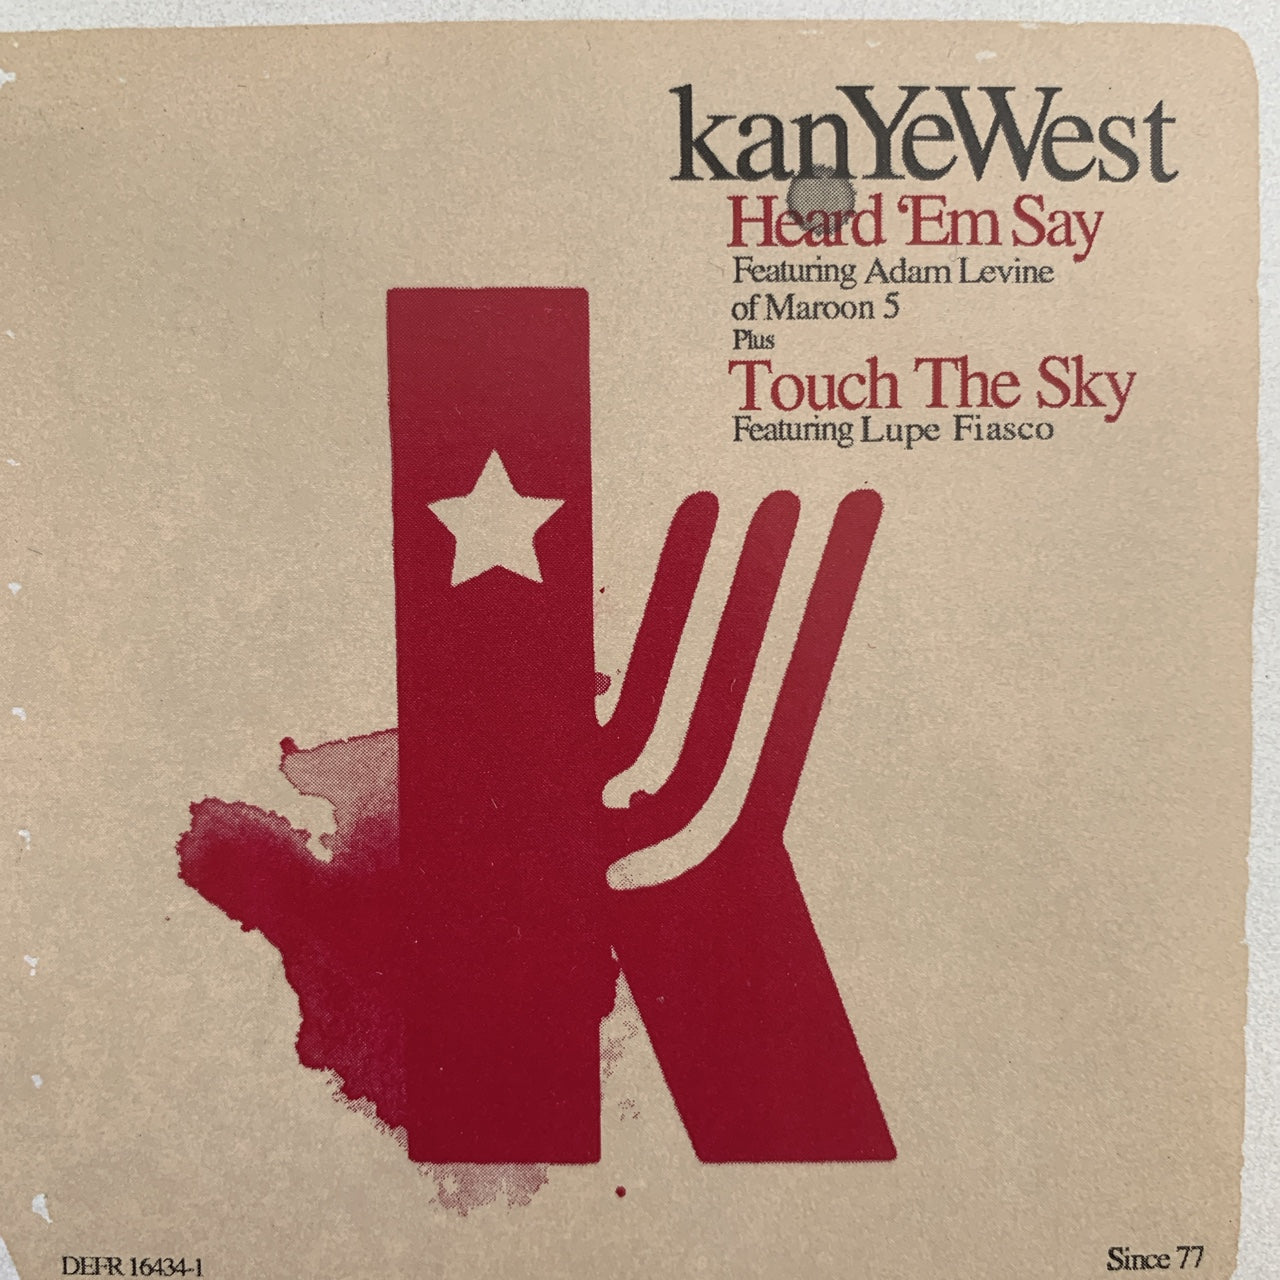 Kanye West “Heard Em Say” / “Touch The Sky” 6 Version 12inch Vinyl